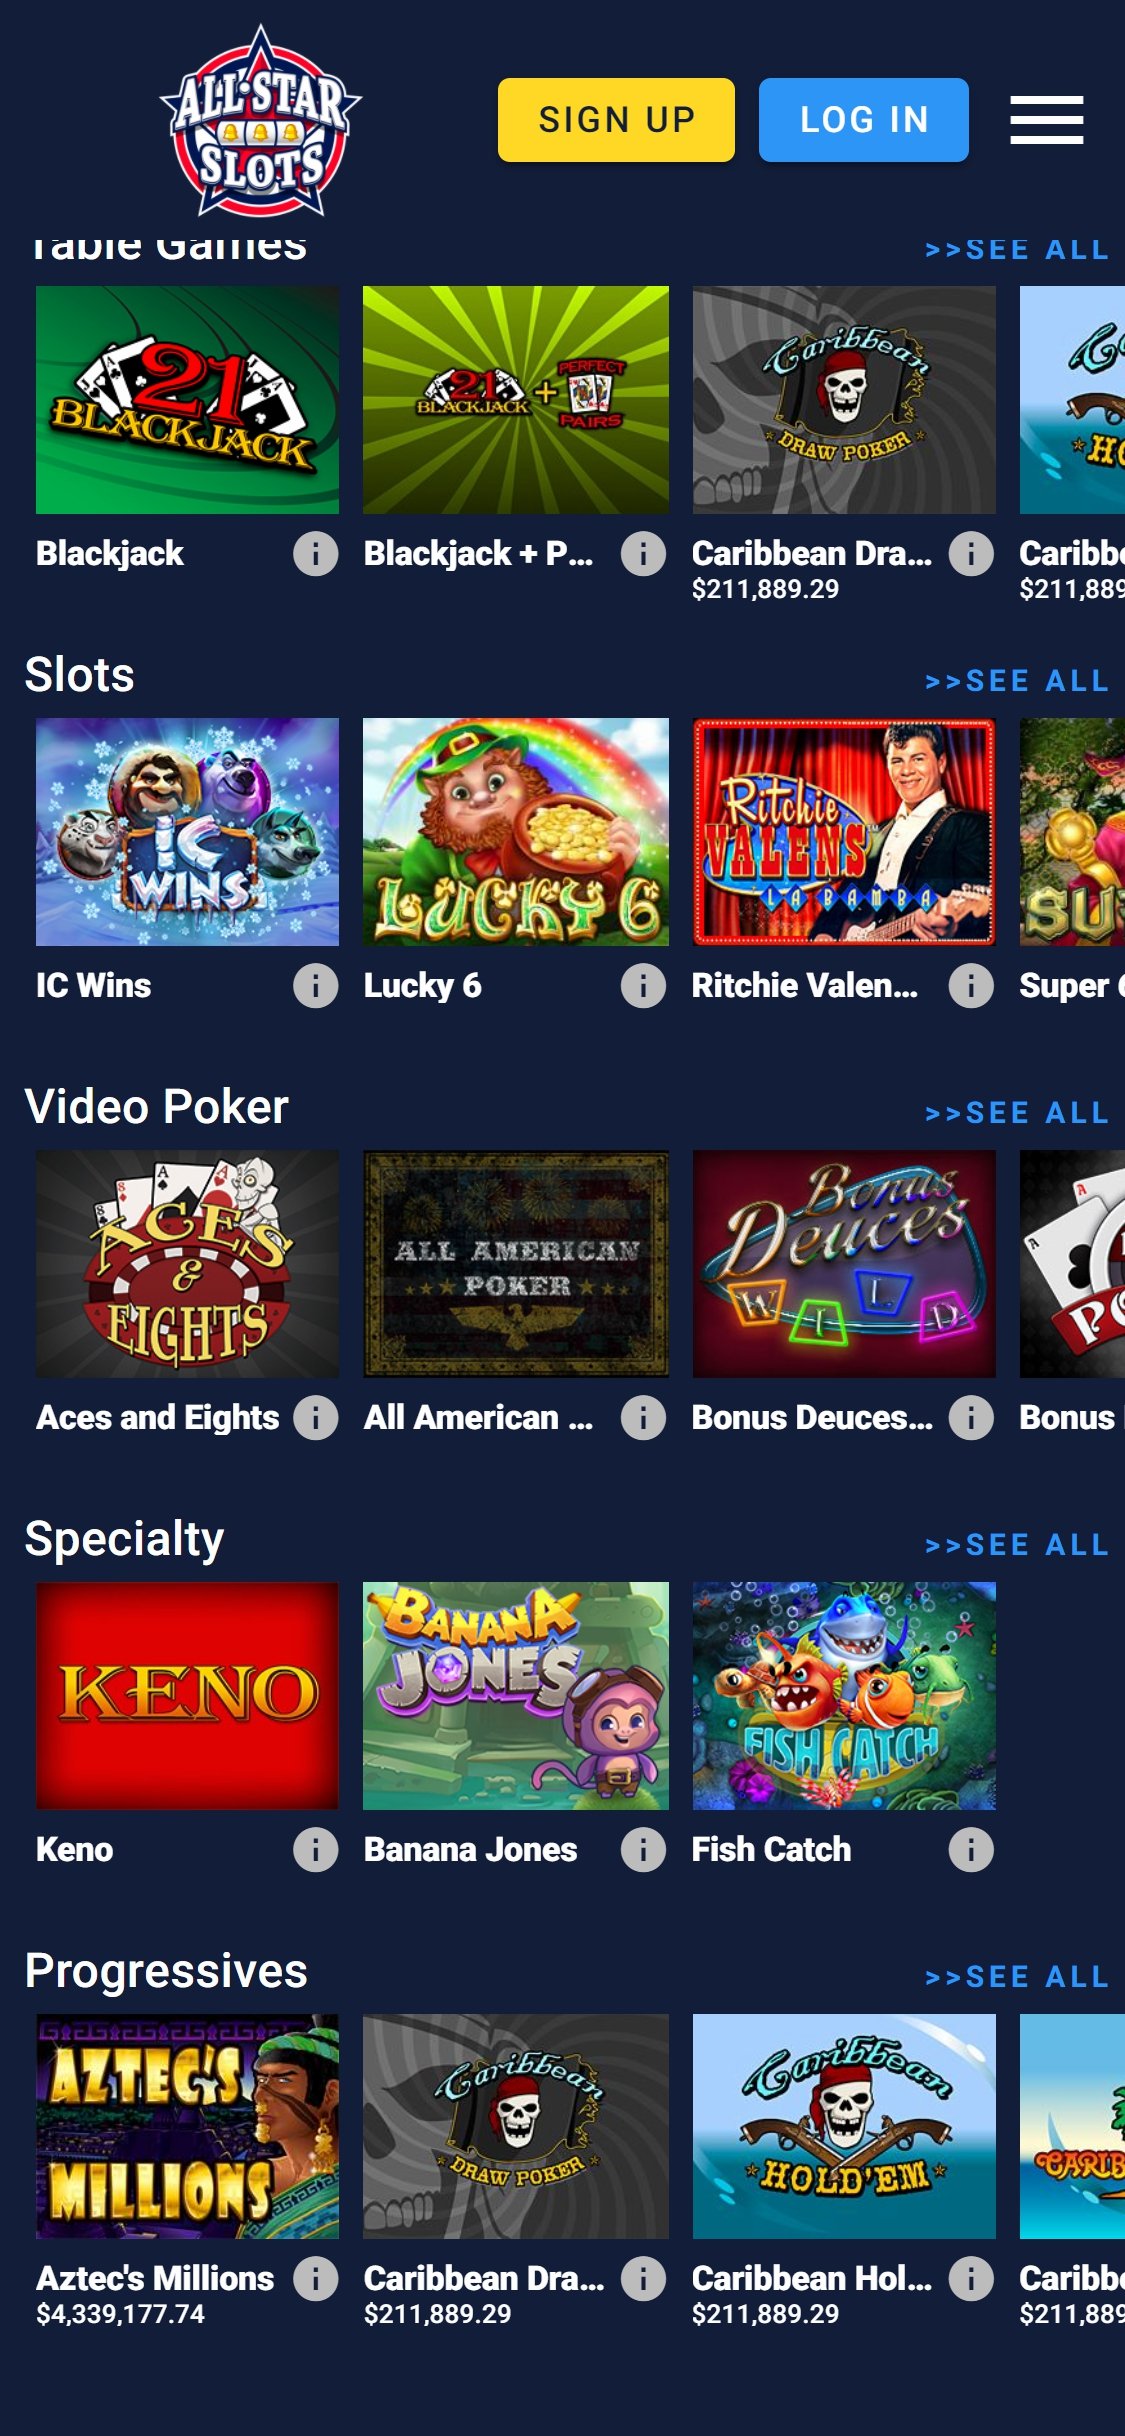 All Star Slots Casino Mobile Games Review